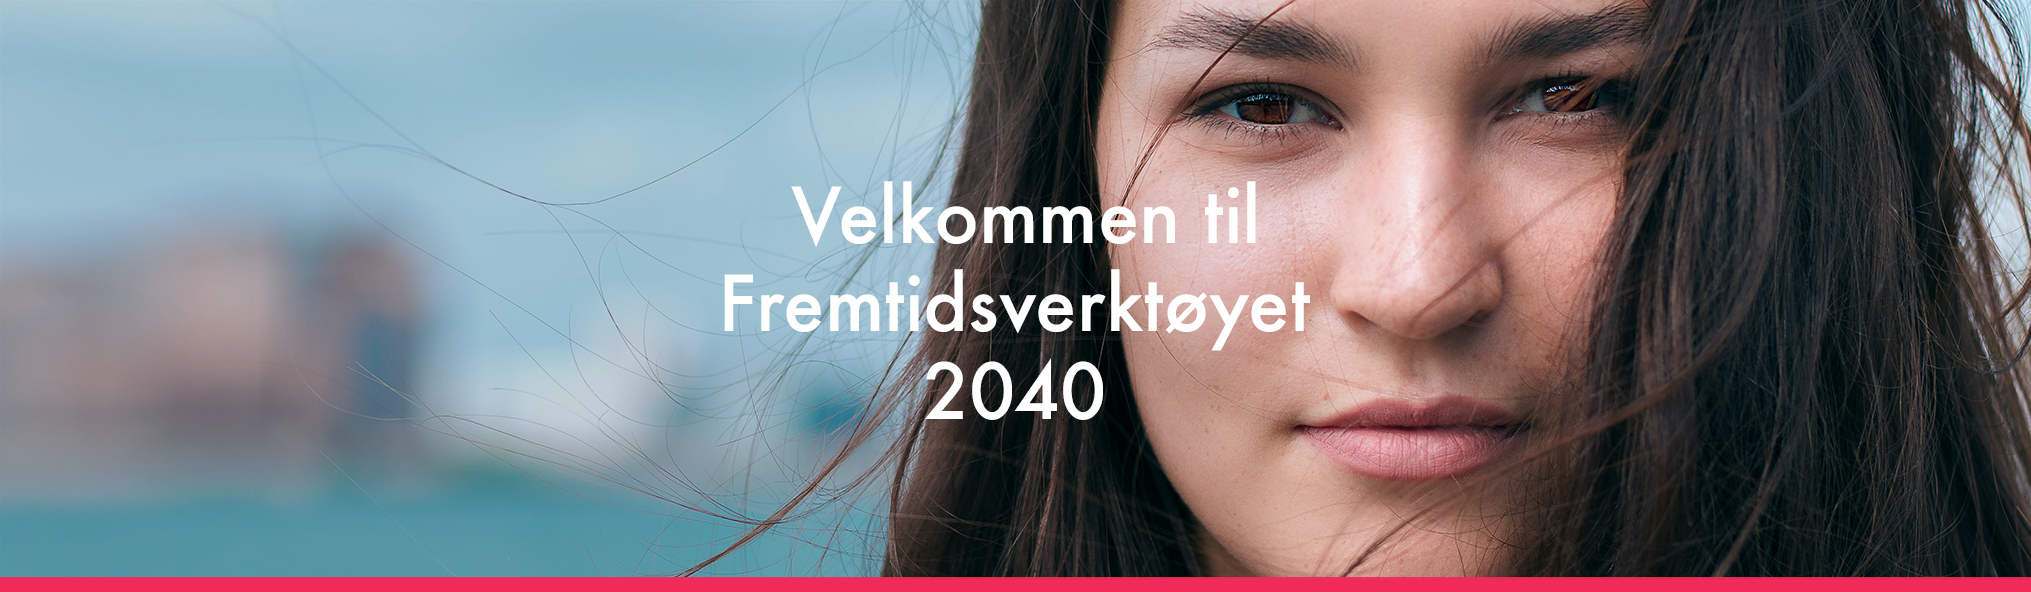 Toppbilde Norge 2040